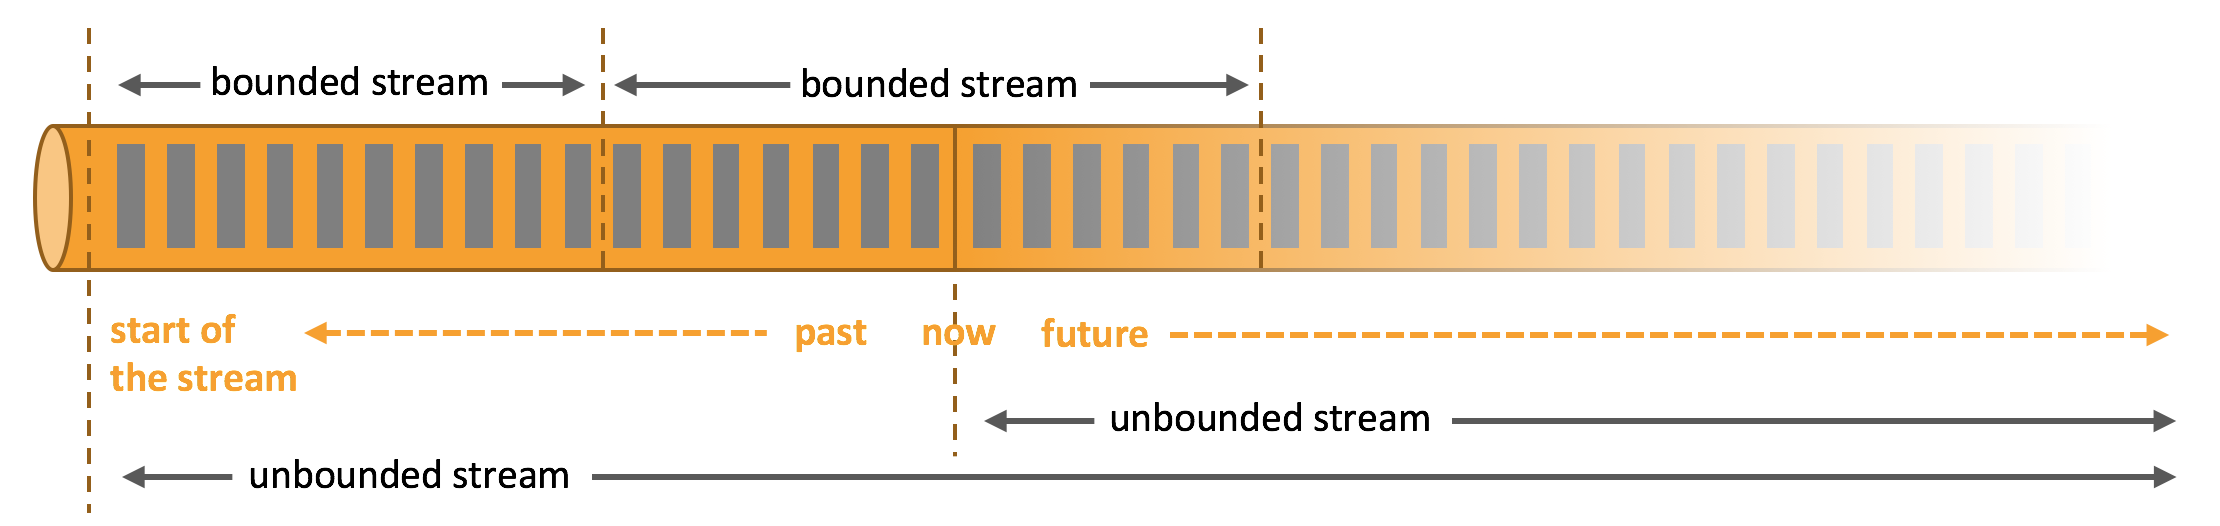 Processing of bounded and unbounded data.